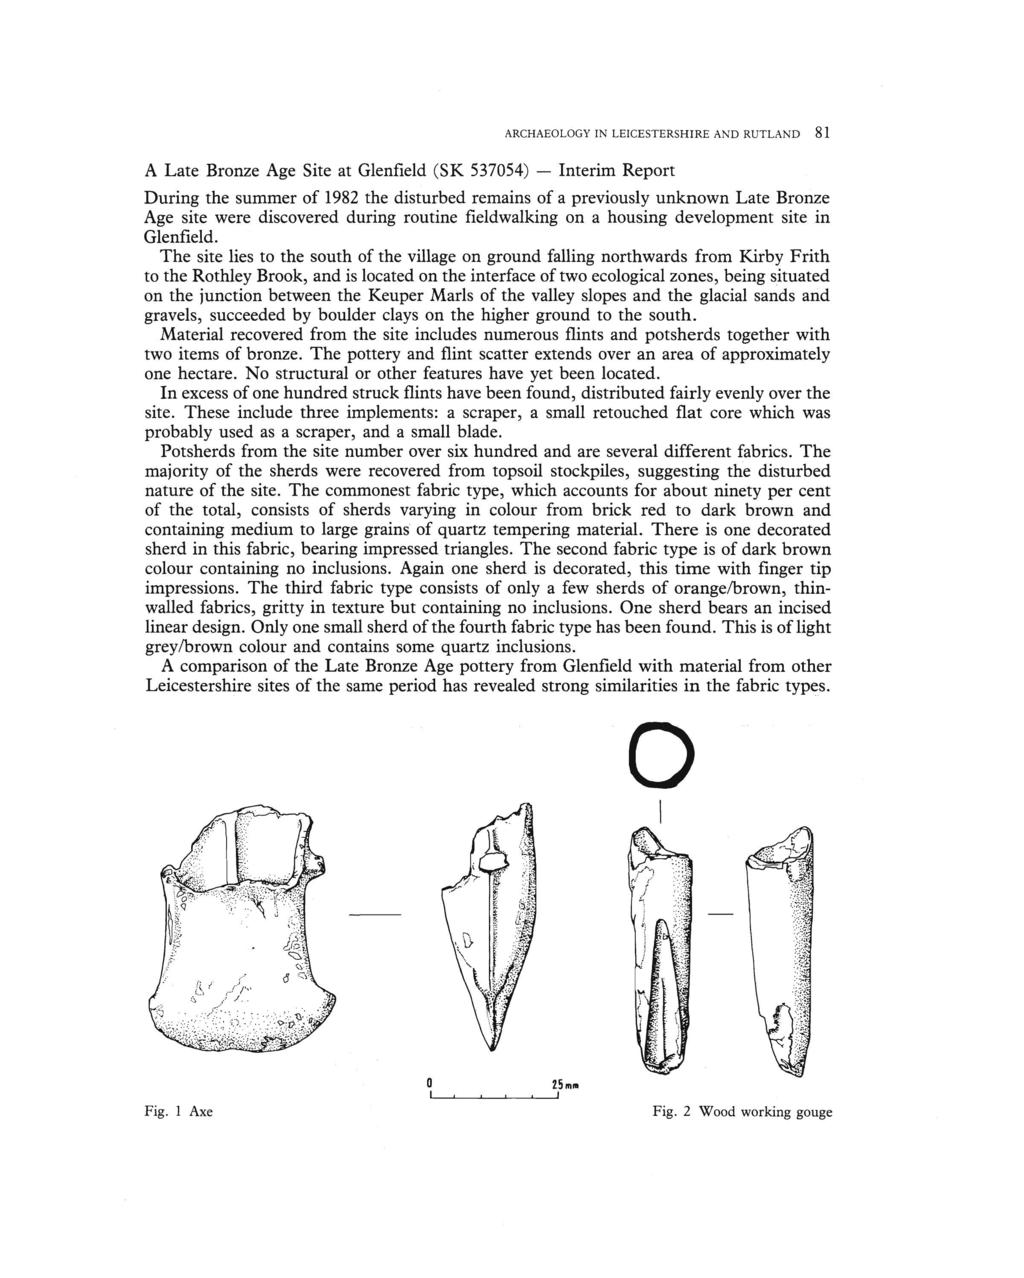 A Late Bronze Age Site at Glenfield (SK 537054) - ARCHAEOLOGY IN LEICESTERSHIRE AND RUTLAND 81 Interim Report During the summer of 1982 the disturbed remains of a previously unknown Late Bronze Age